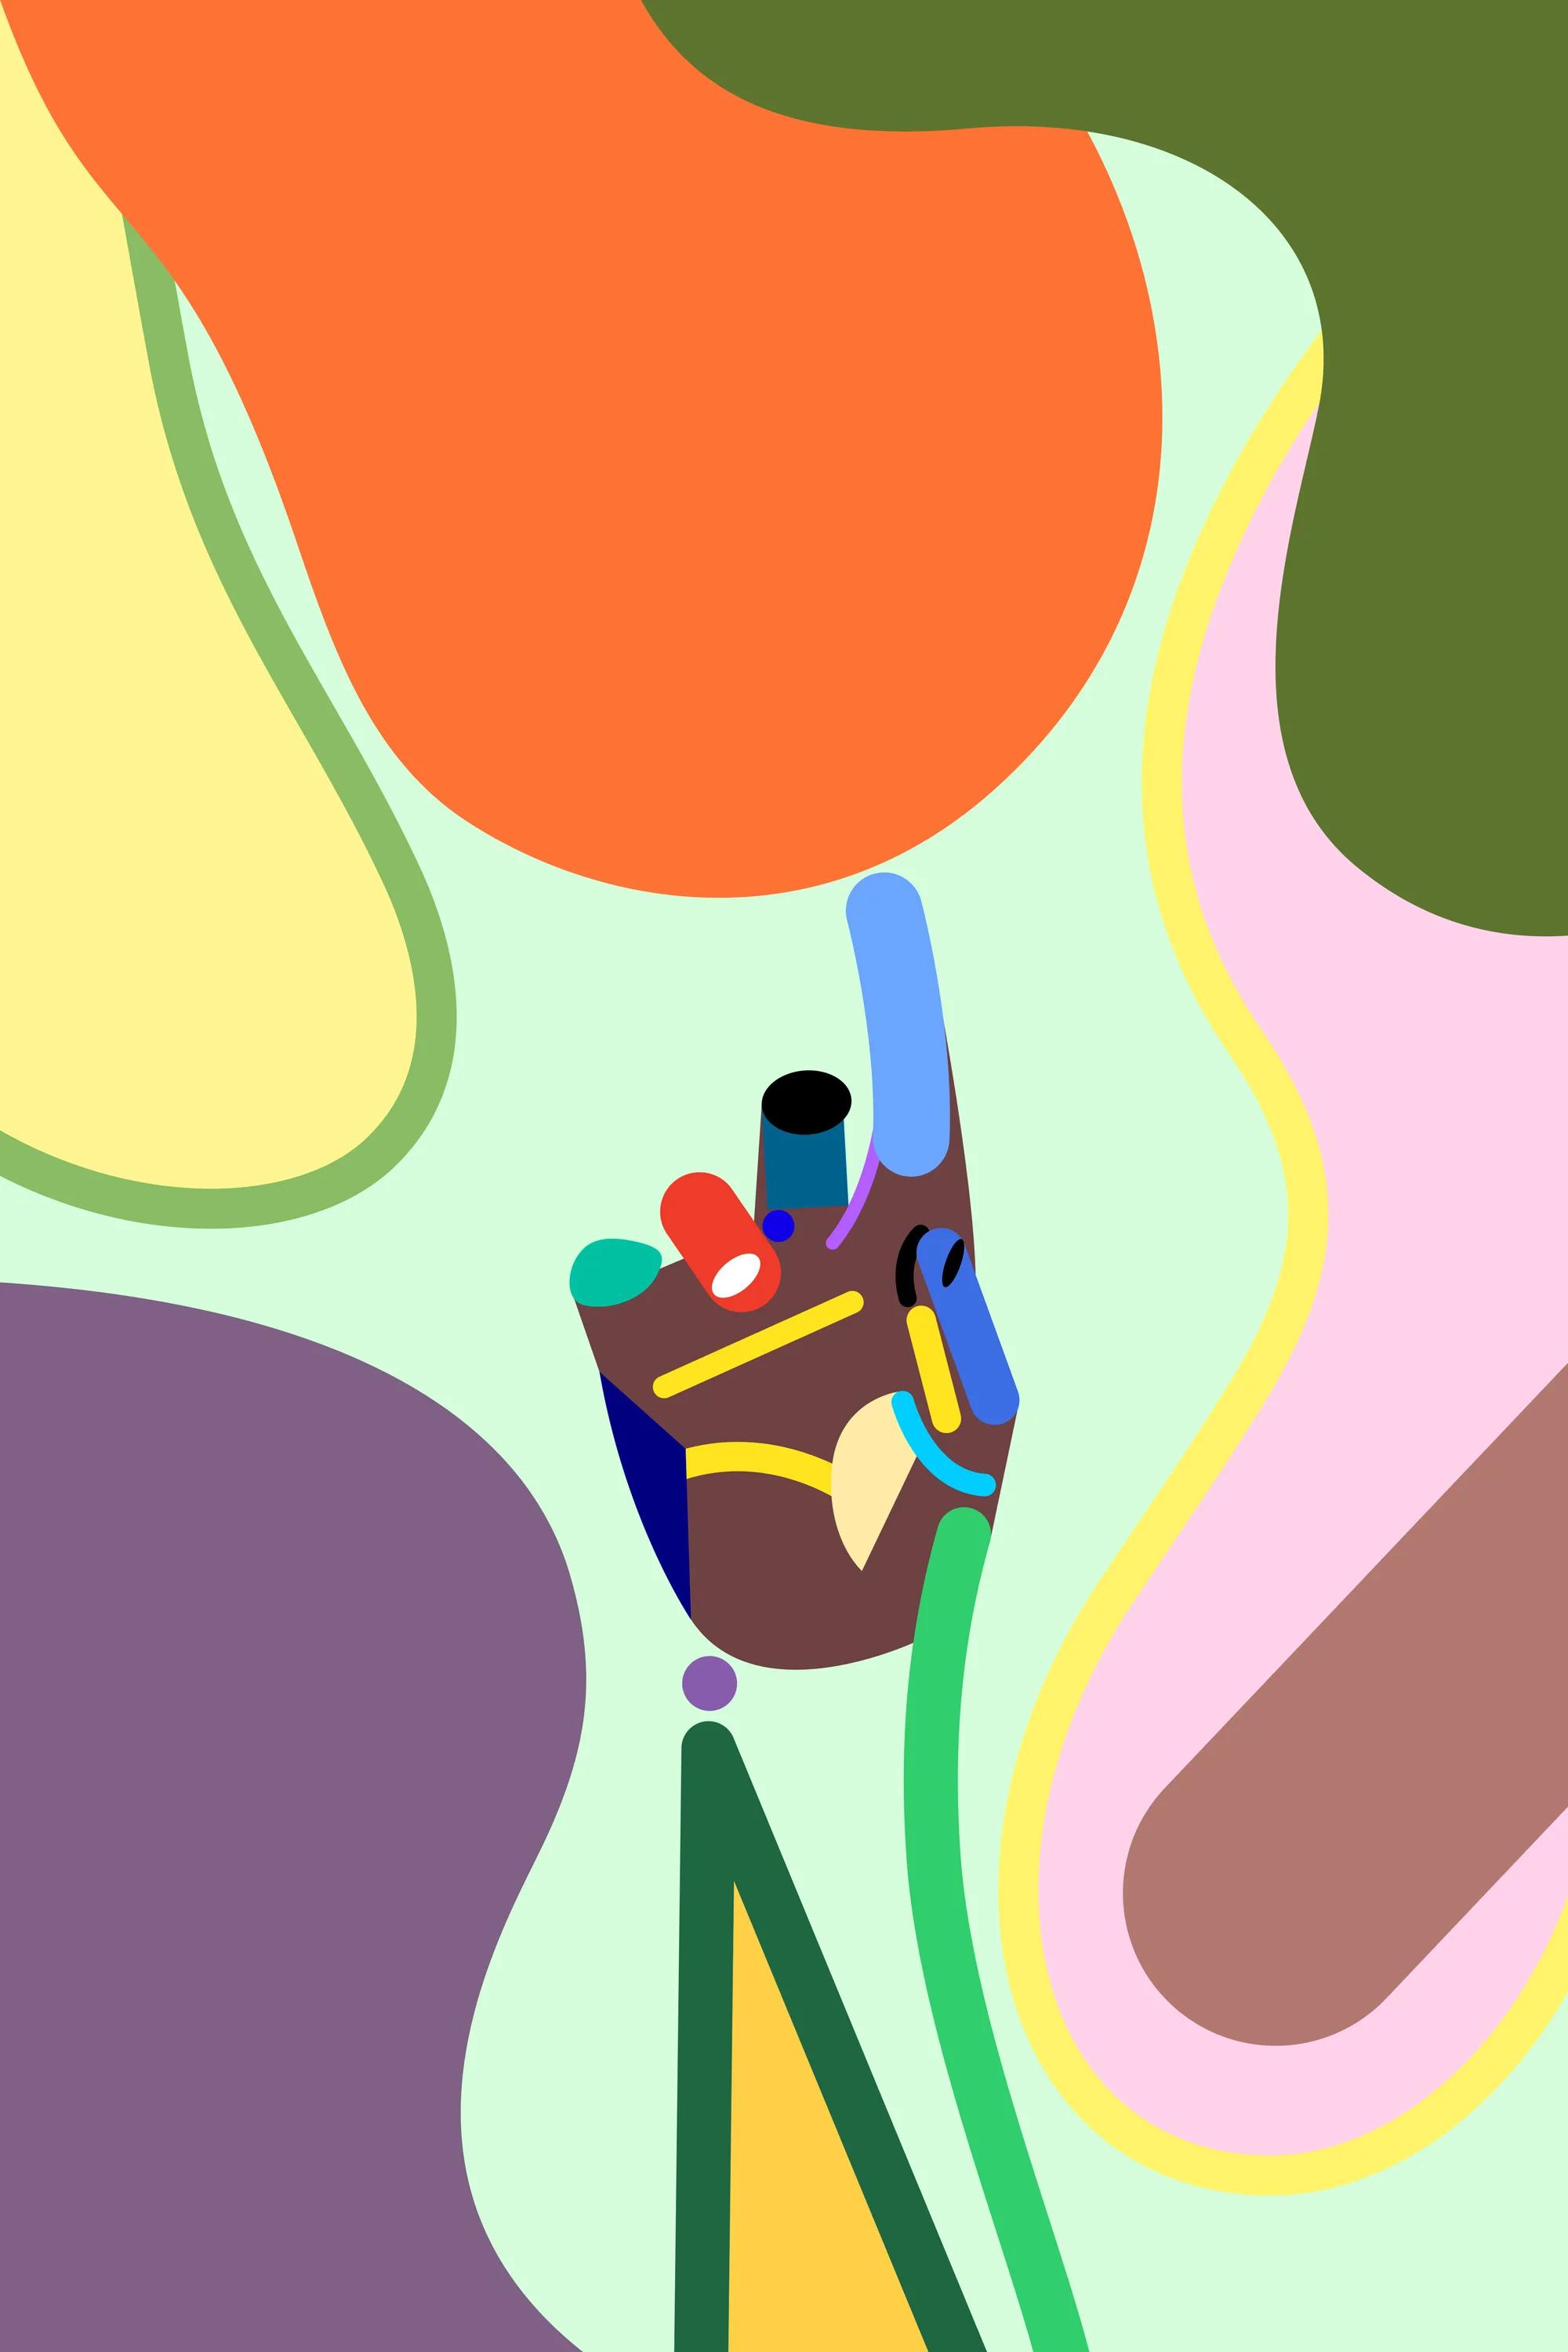 Illustration of a hand and colorful abstract shapes